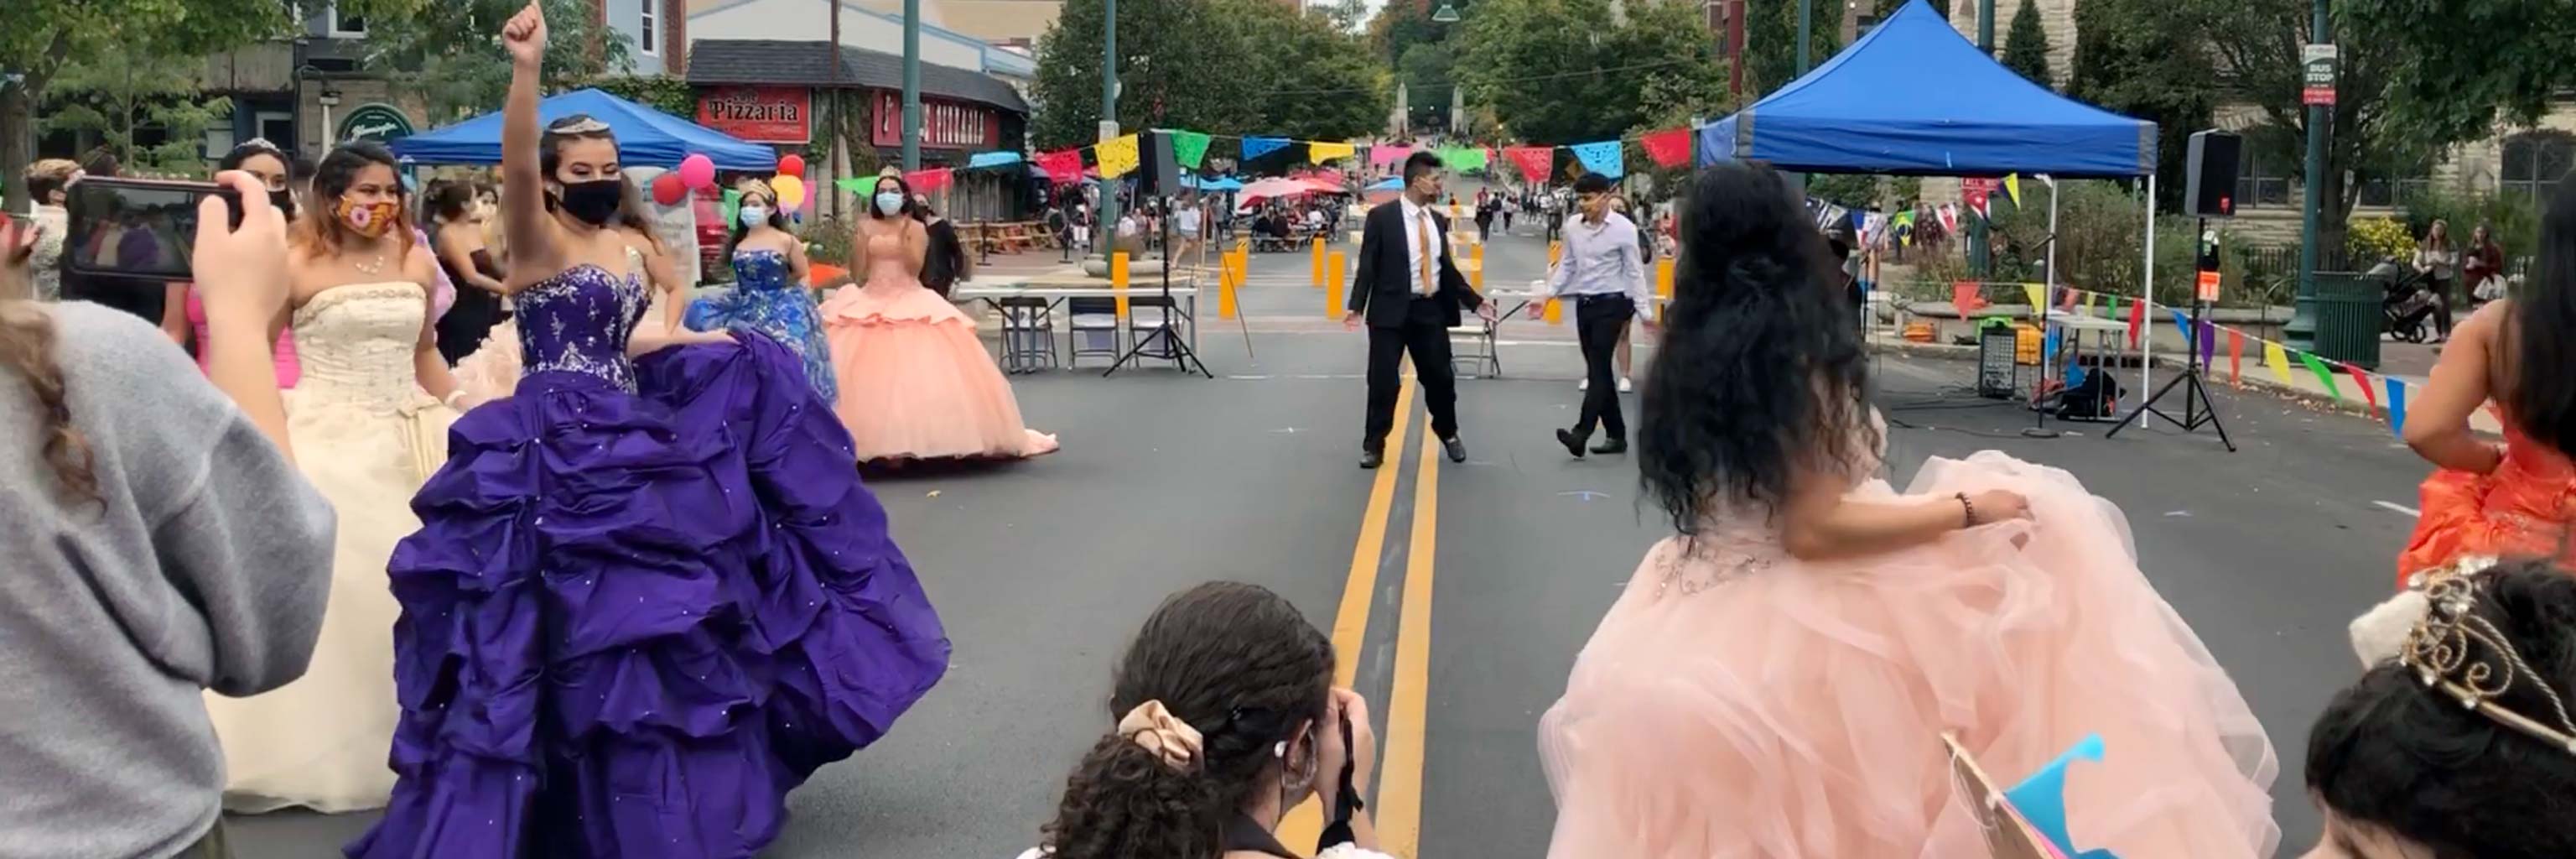 A street celebration with several young women in formal gowns.